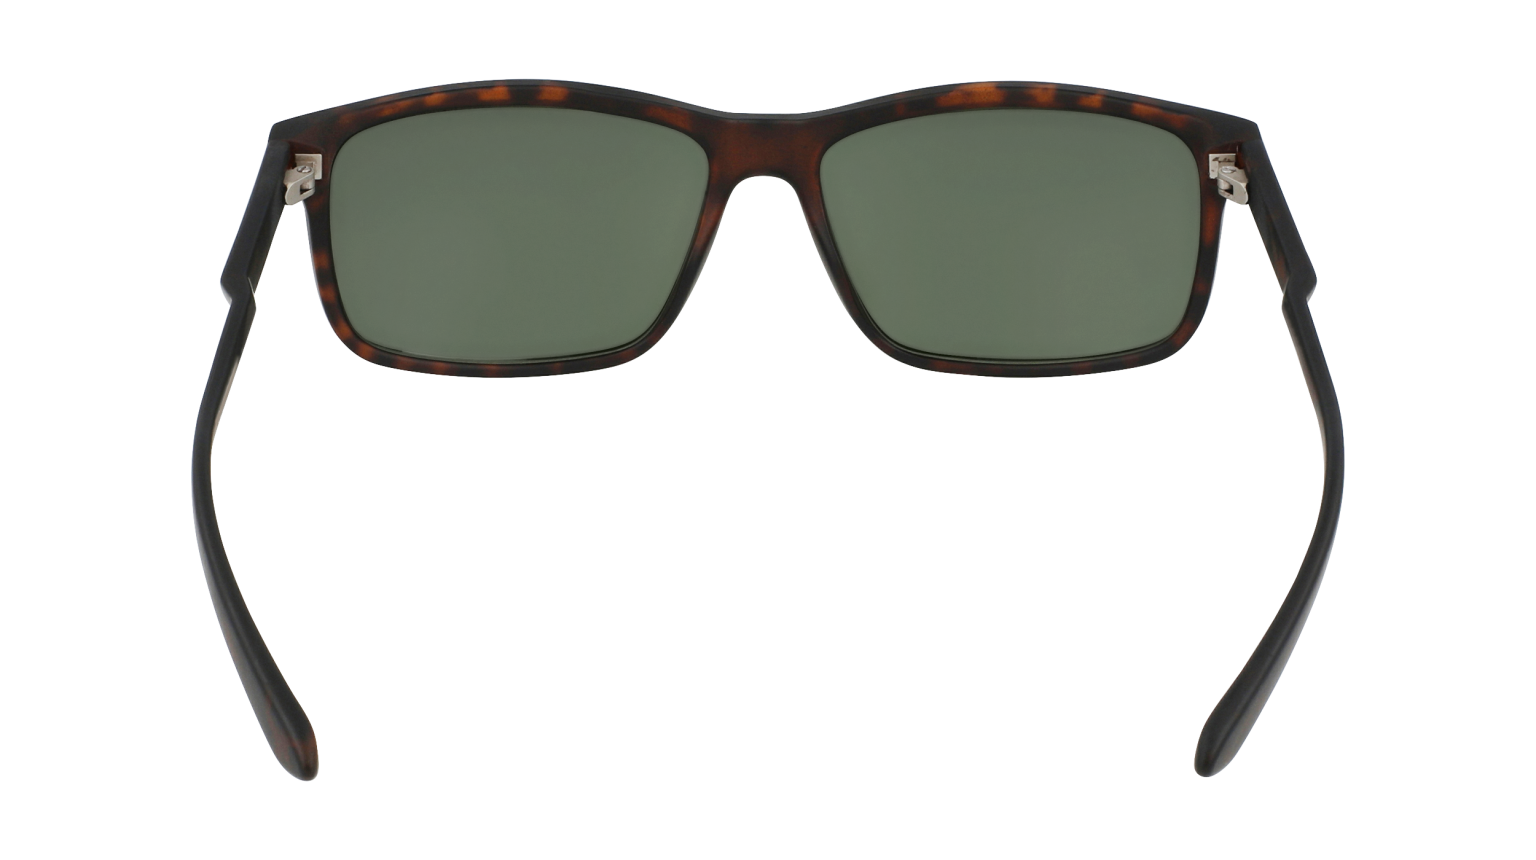 COUNT UPCYCLED - Matte Tortoise with Lumalens G15 Green Lens